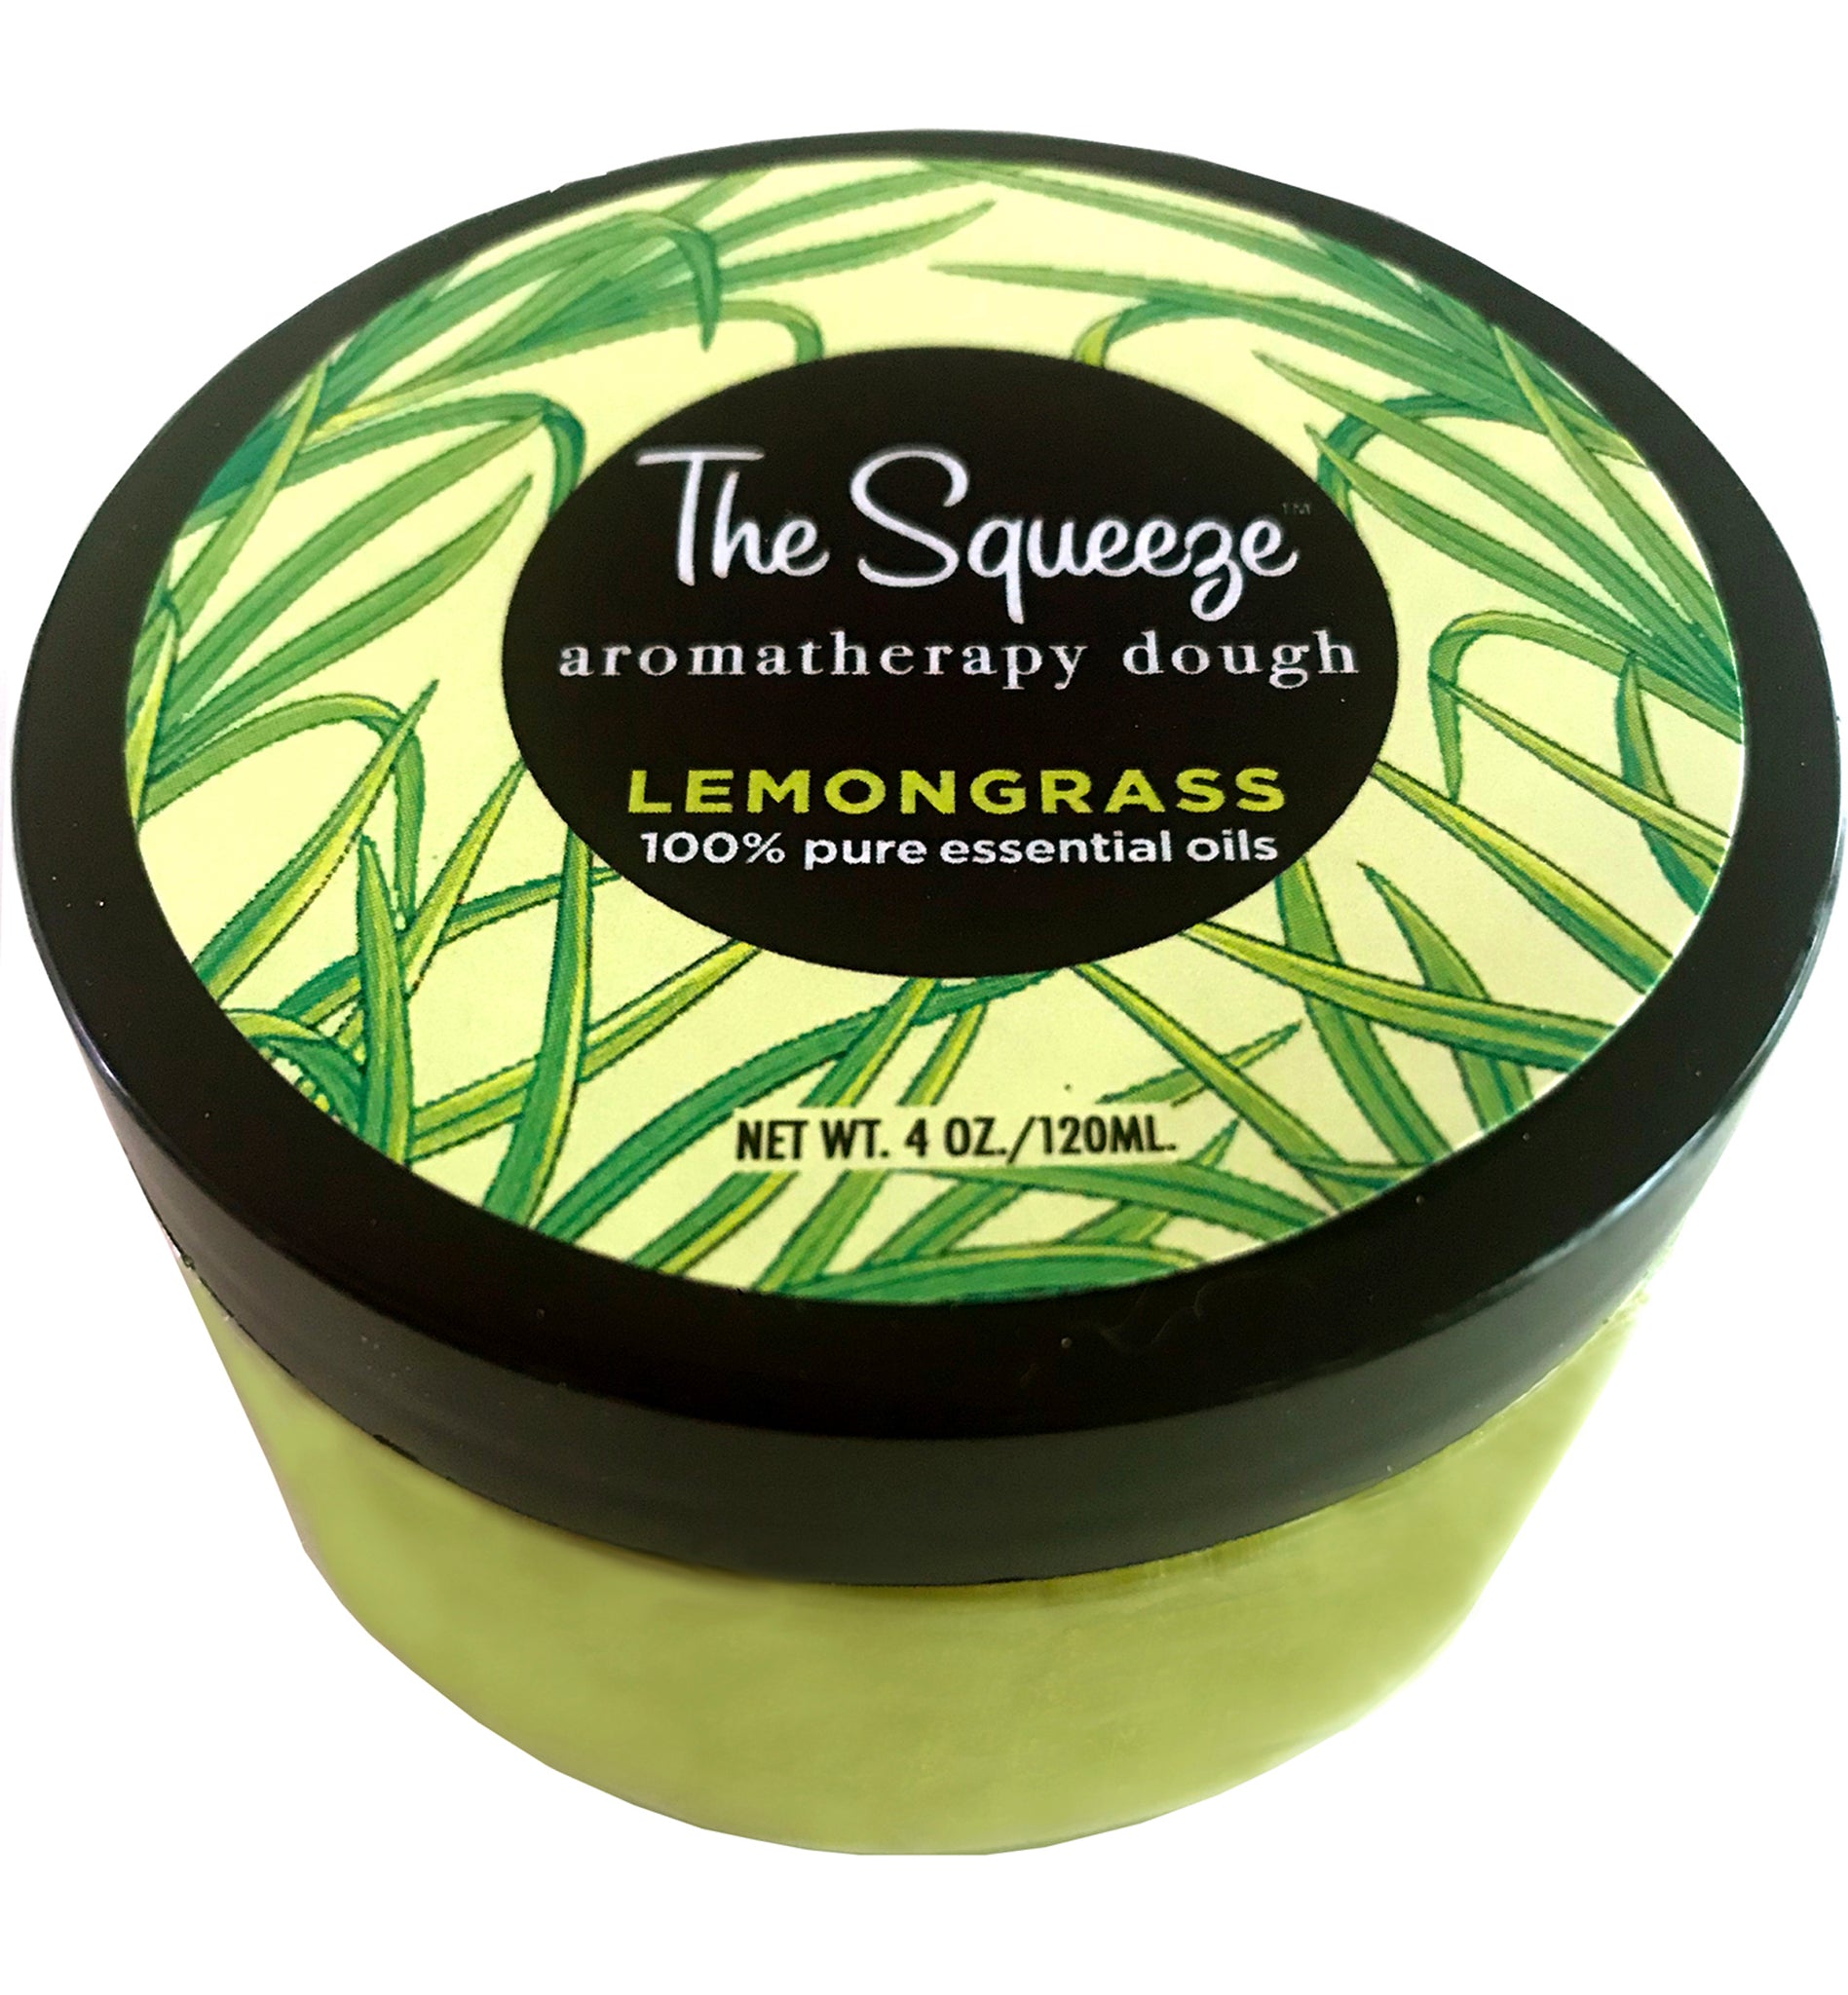 The Squeeze -Lemongrass 100% essential oil stress relief dough for self care, aromatherapy stress ball, stress relief FREE SHIPPING